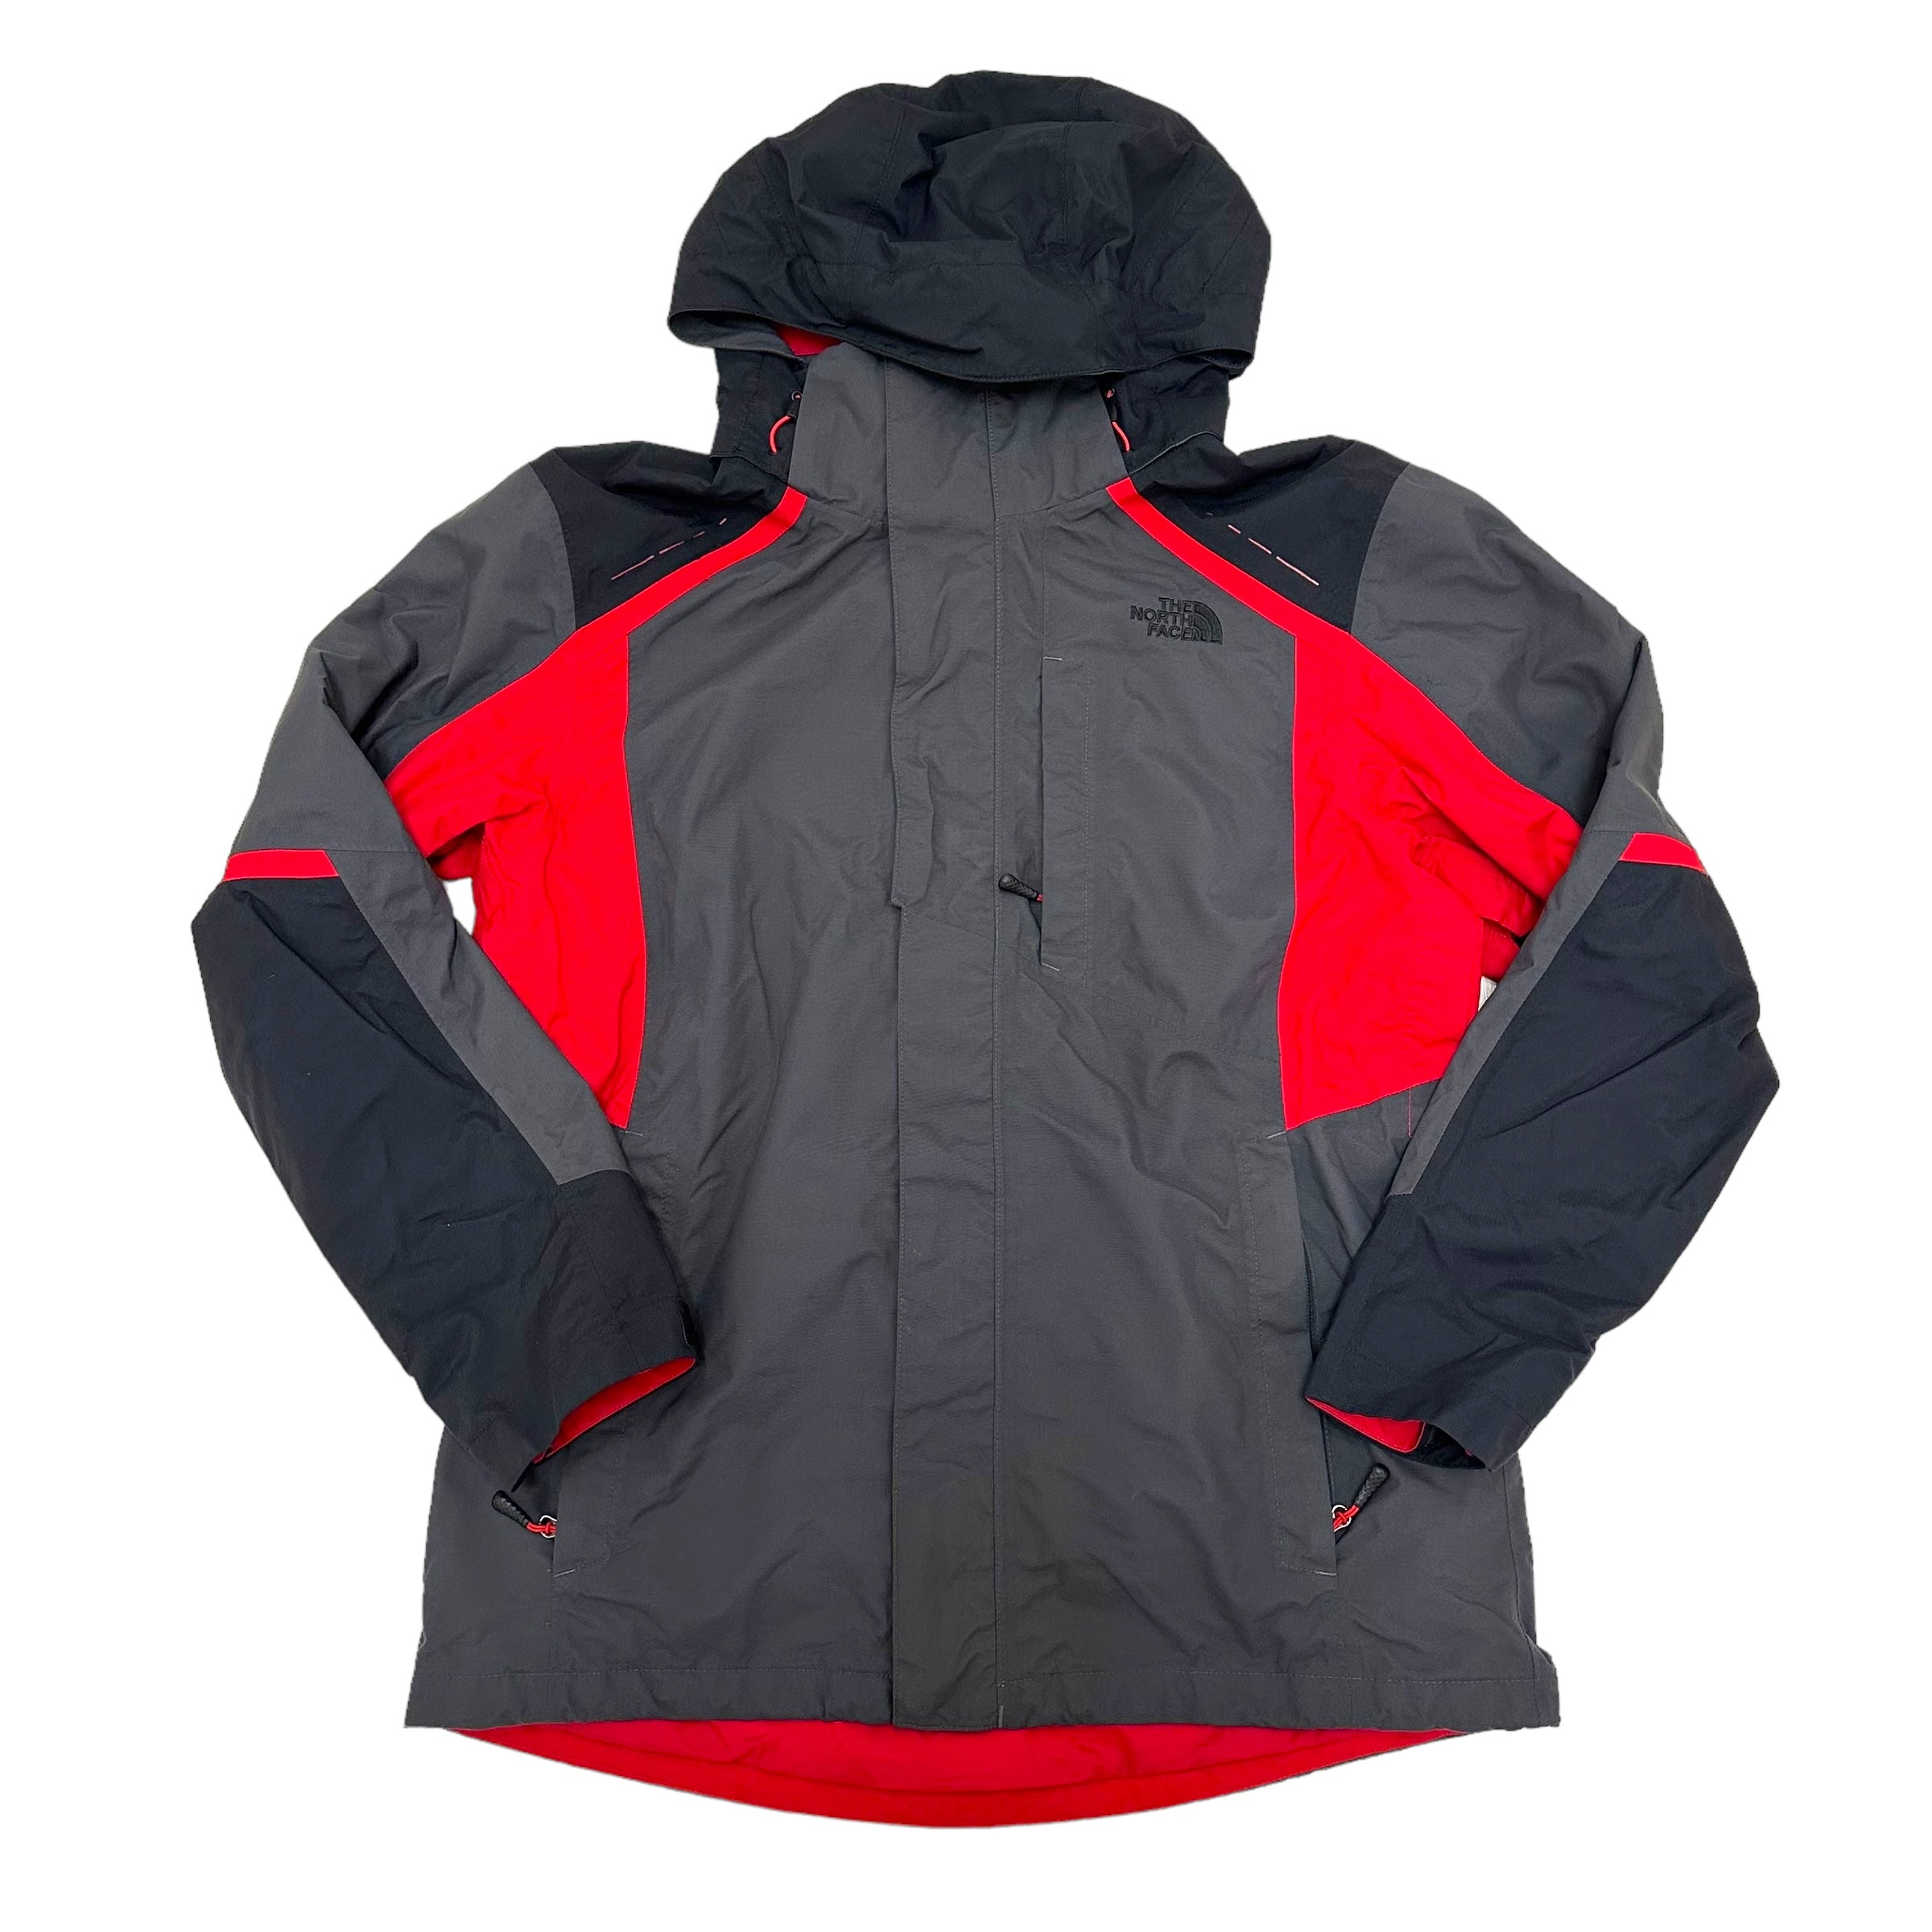 GN101 THE NORTH FACE HYVENT ナイロン マウンテン パーカー M メンズ ...